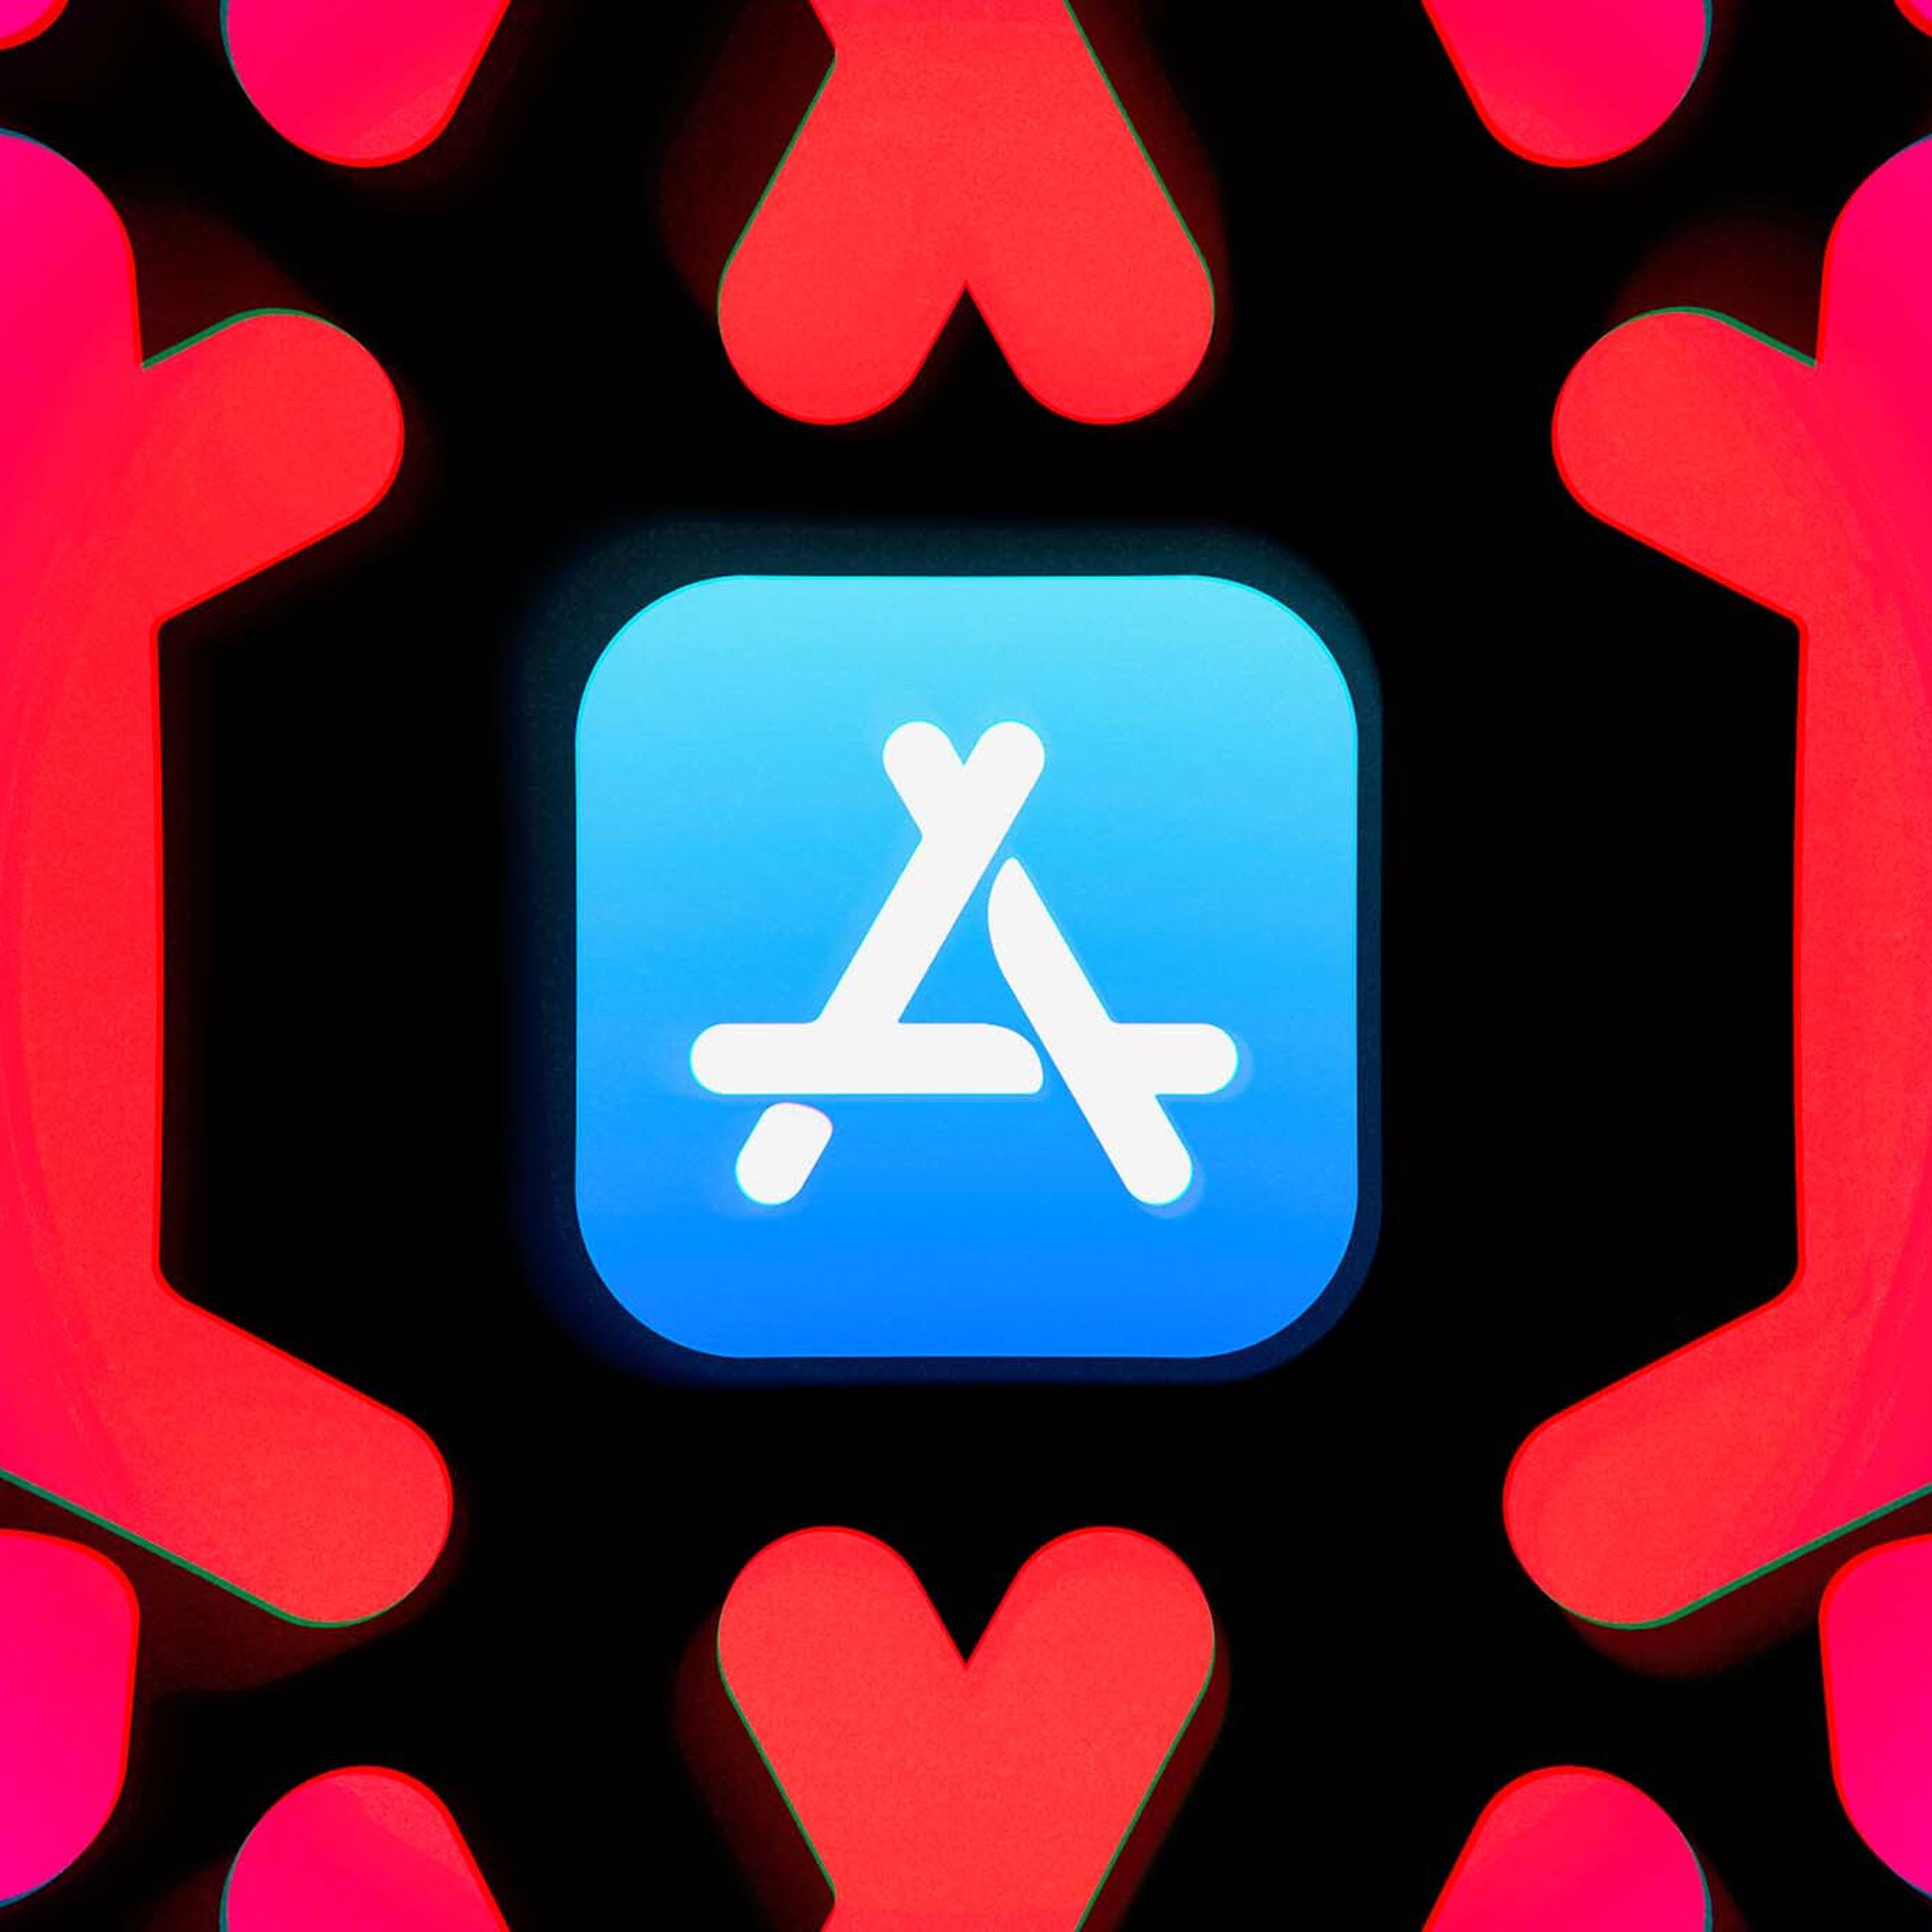 A picture of the App Store logo with larger, red versions of the App Store “A” surrounding it on a black background.